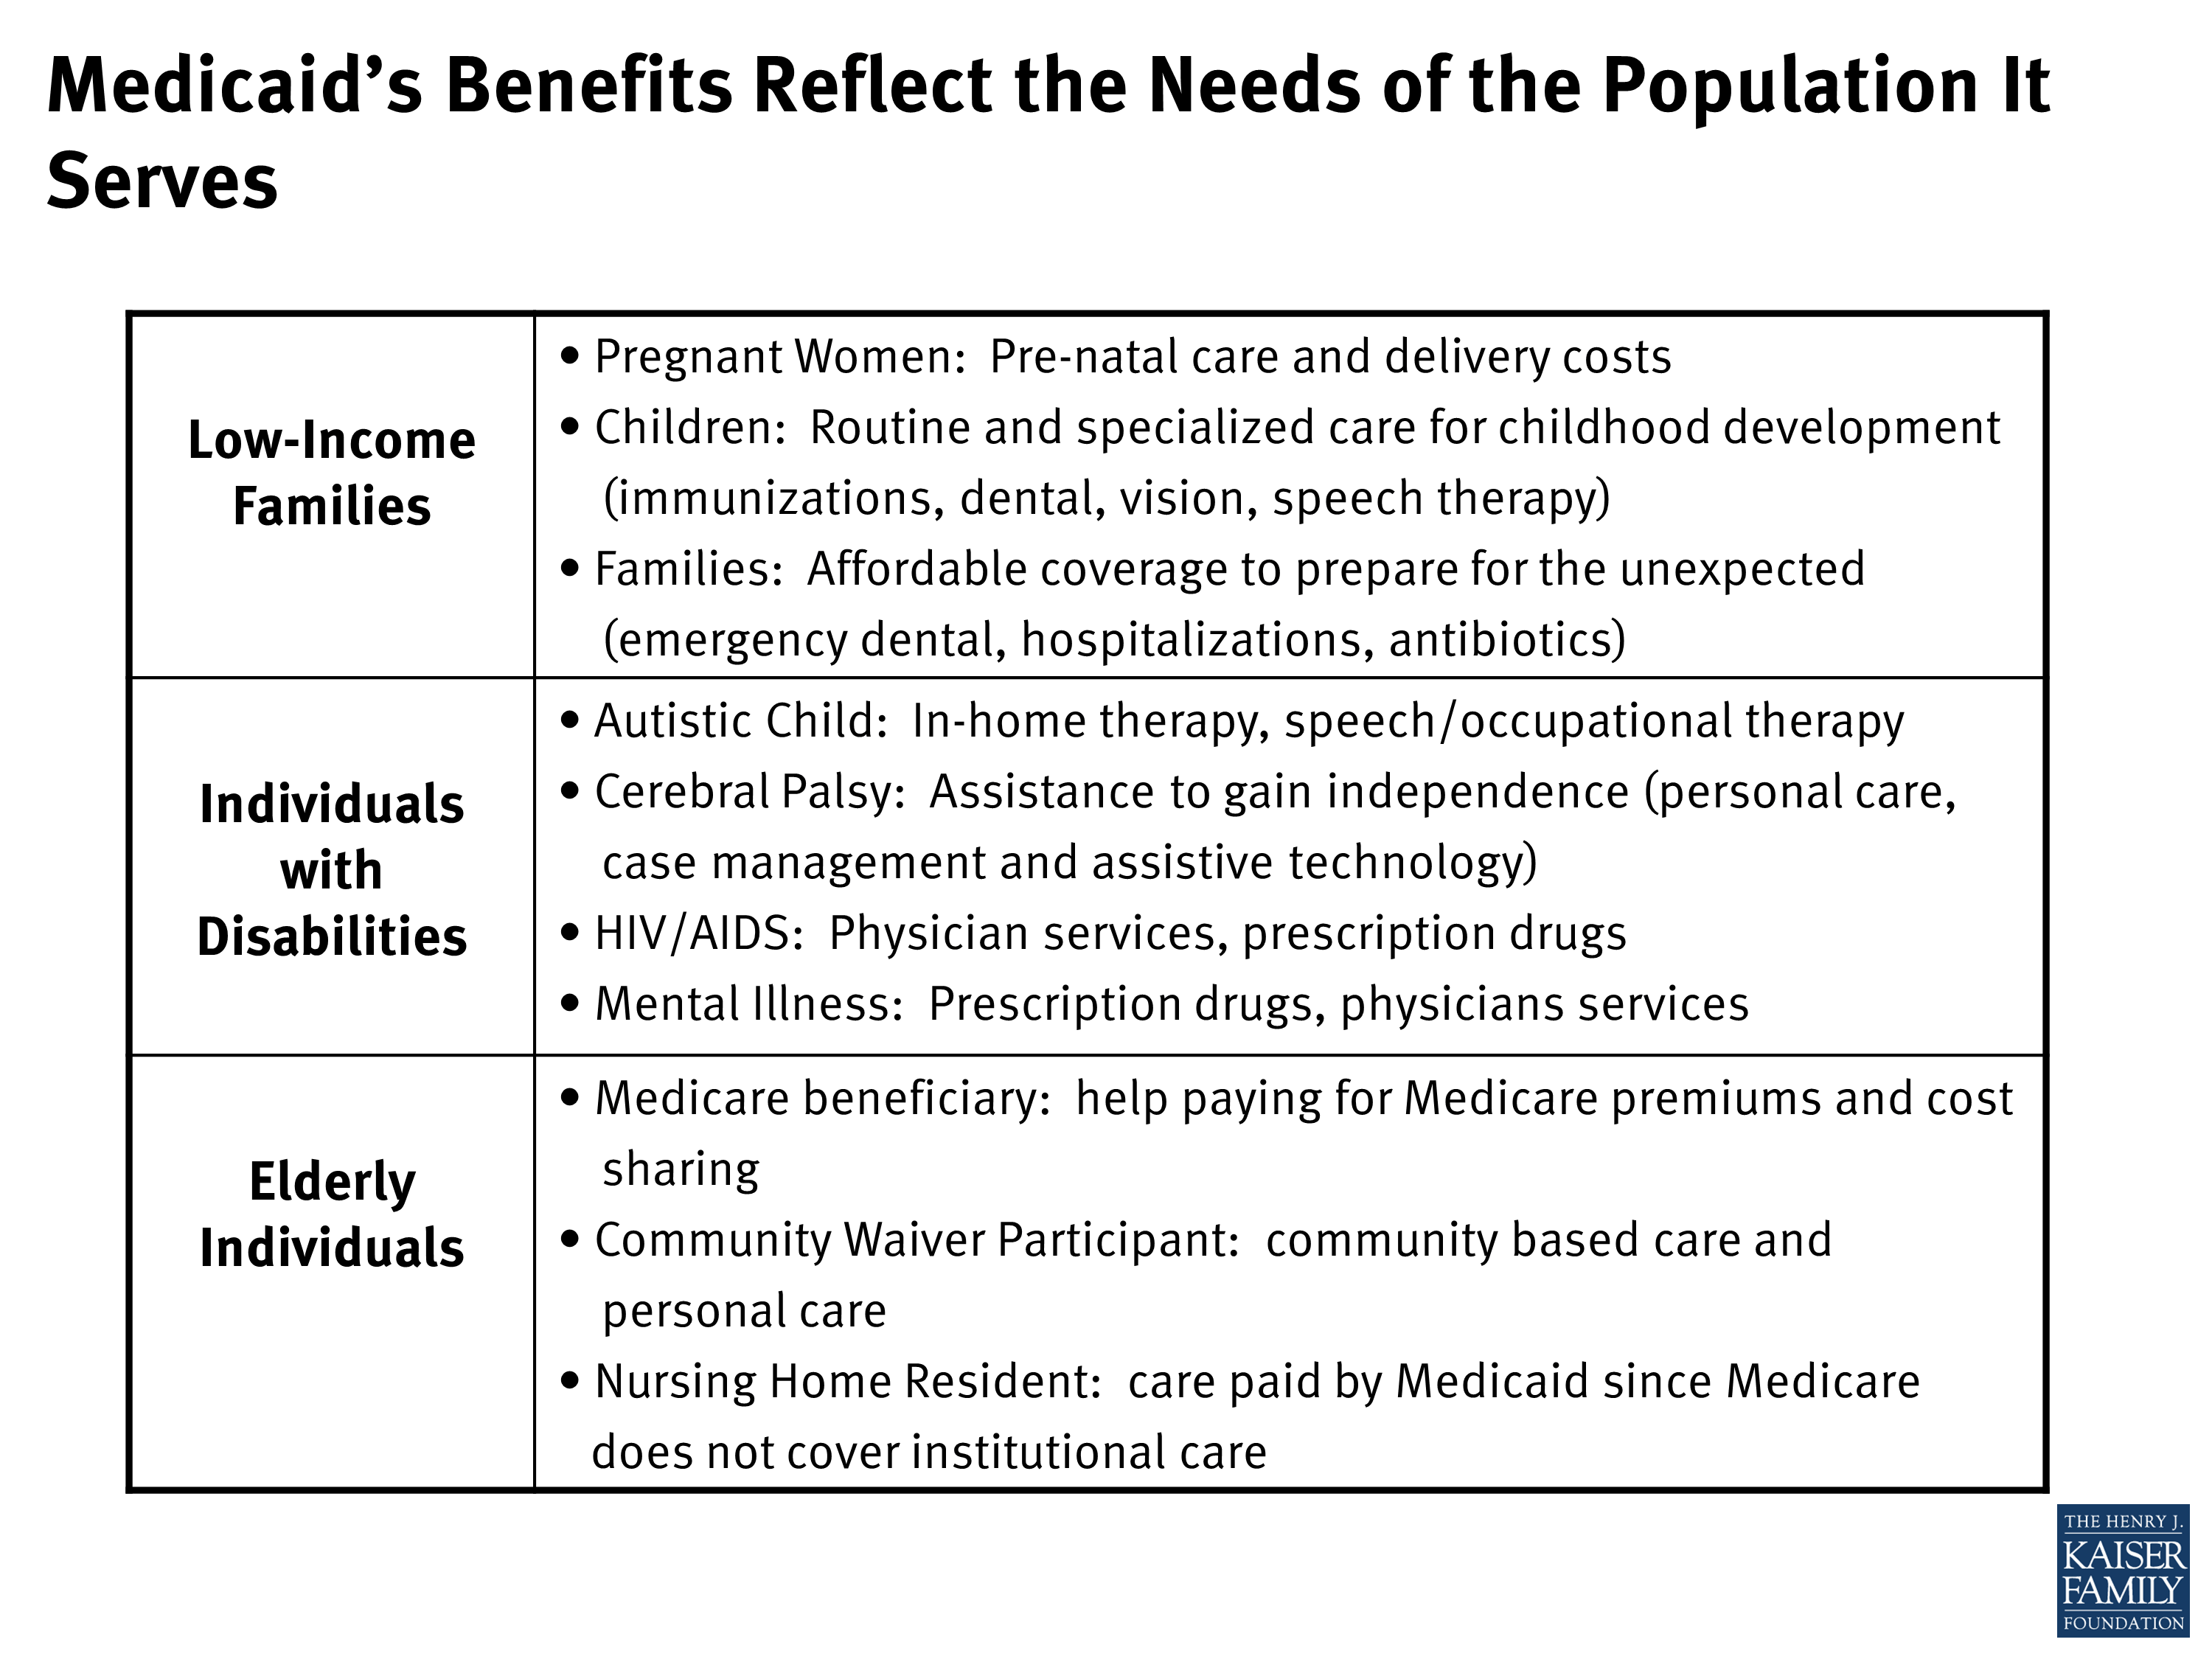 Medicaid’s Benefits Reflect the Needs of the Population It Serves KFF